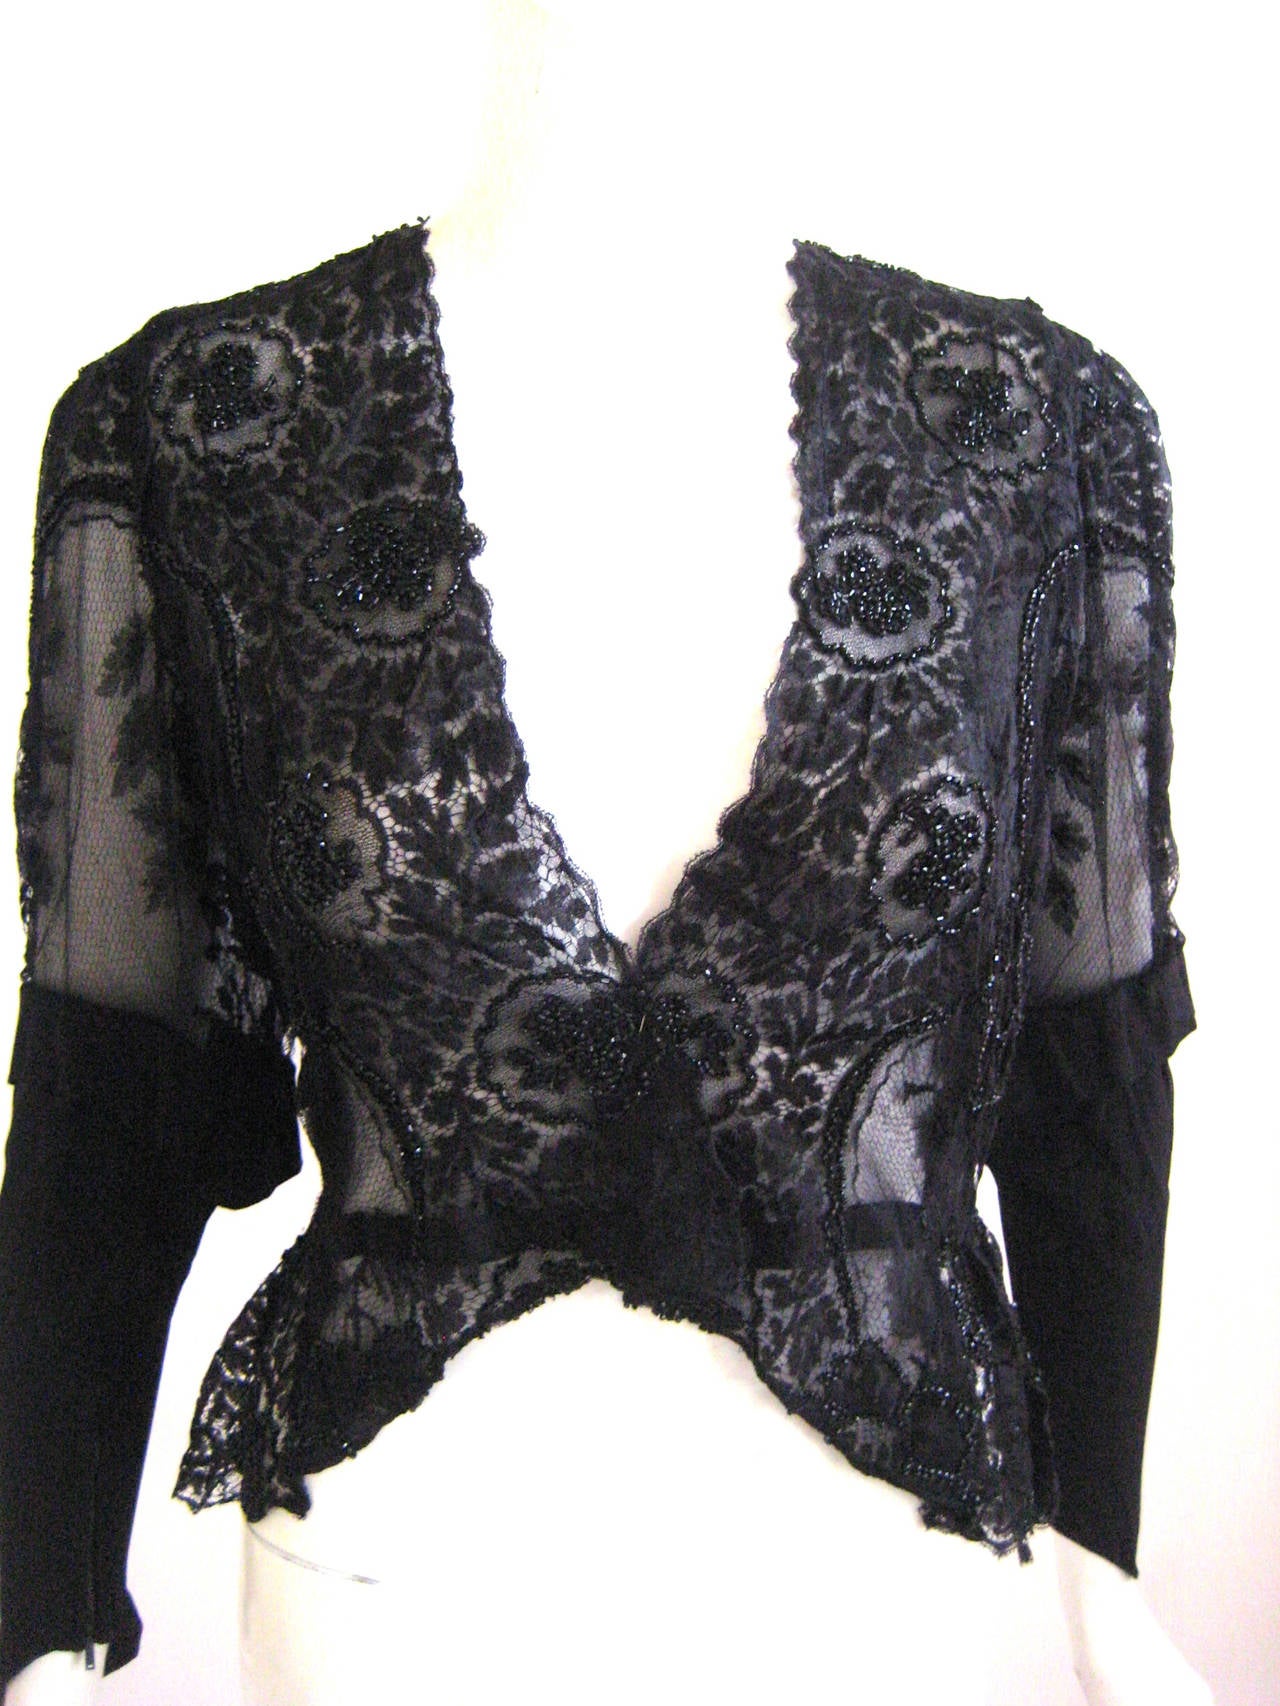 silk chantilly lace 
lined in silk chiffon
silk crepe sleeve with zippers at cuffs 
gorgeous embroidered beadwork